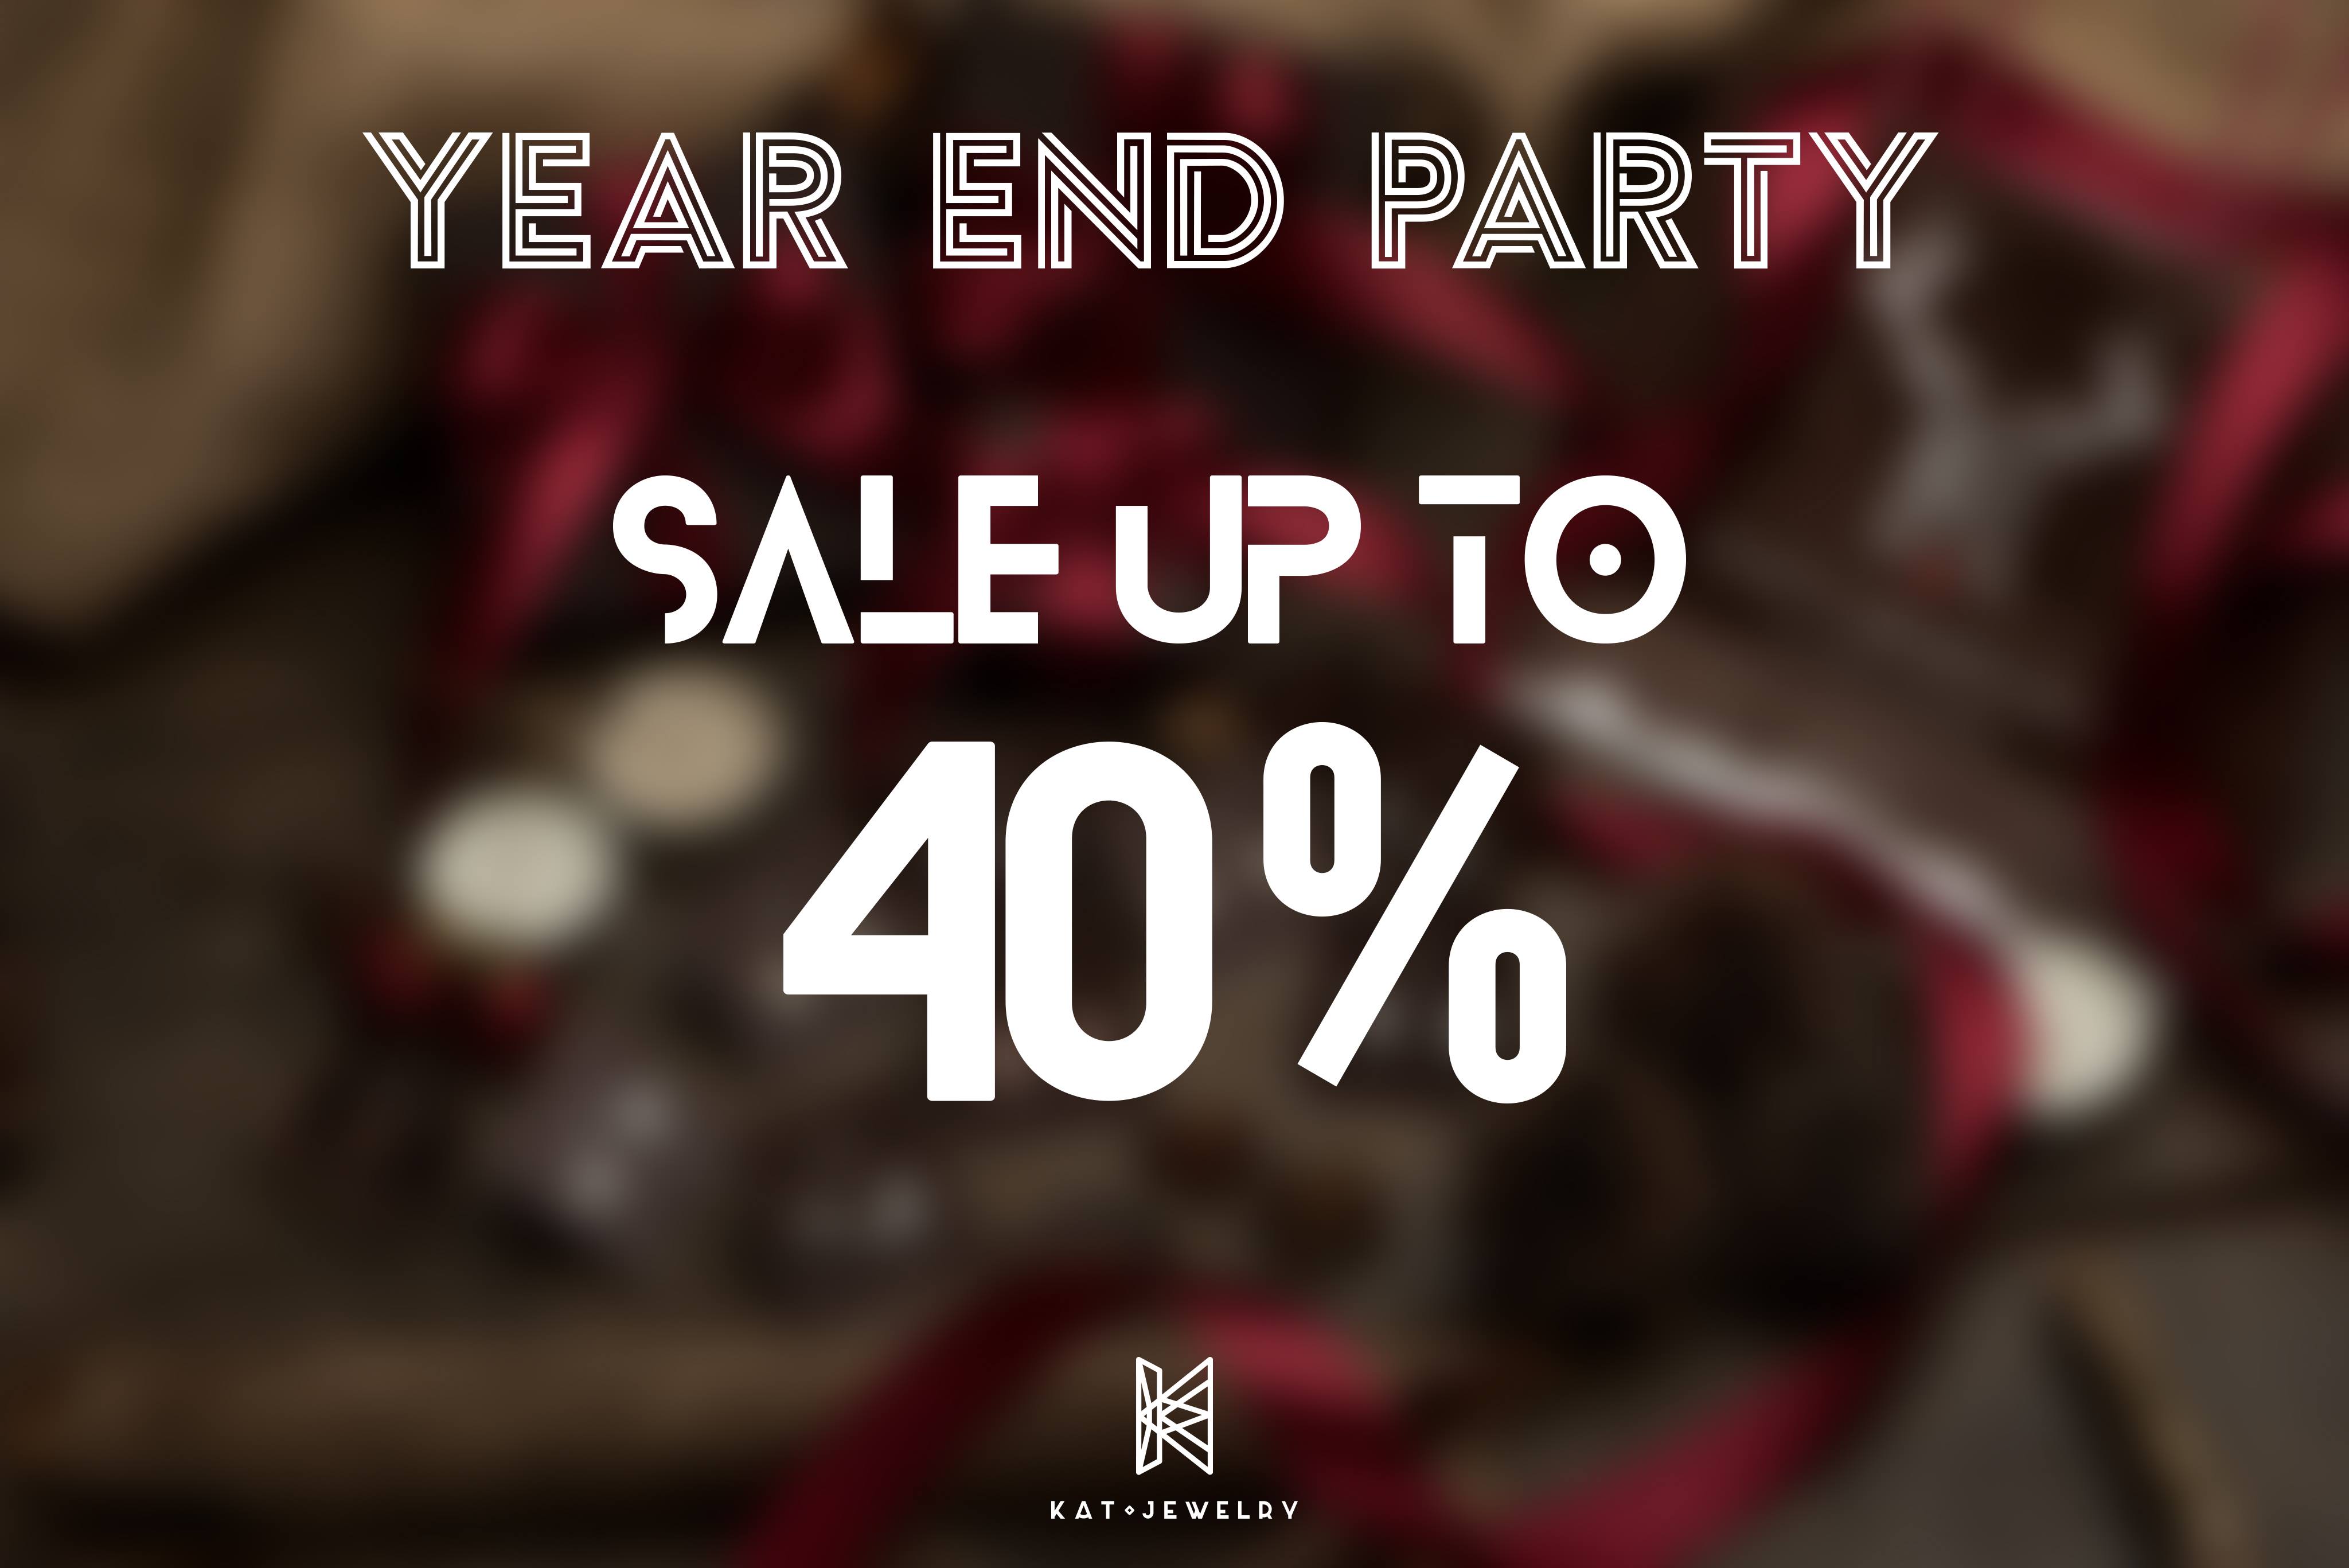 YEAR END SALE PARTY - 2018